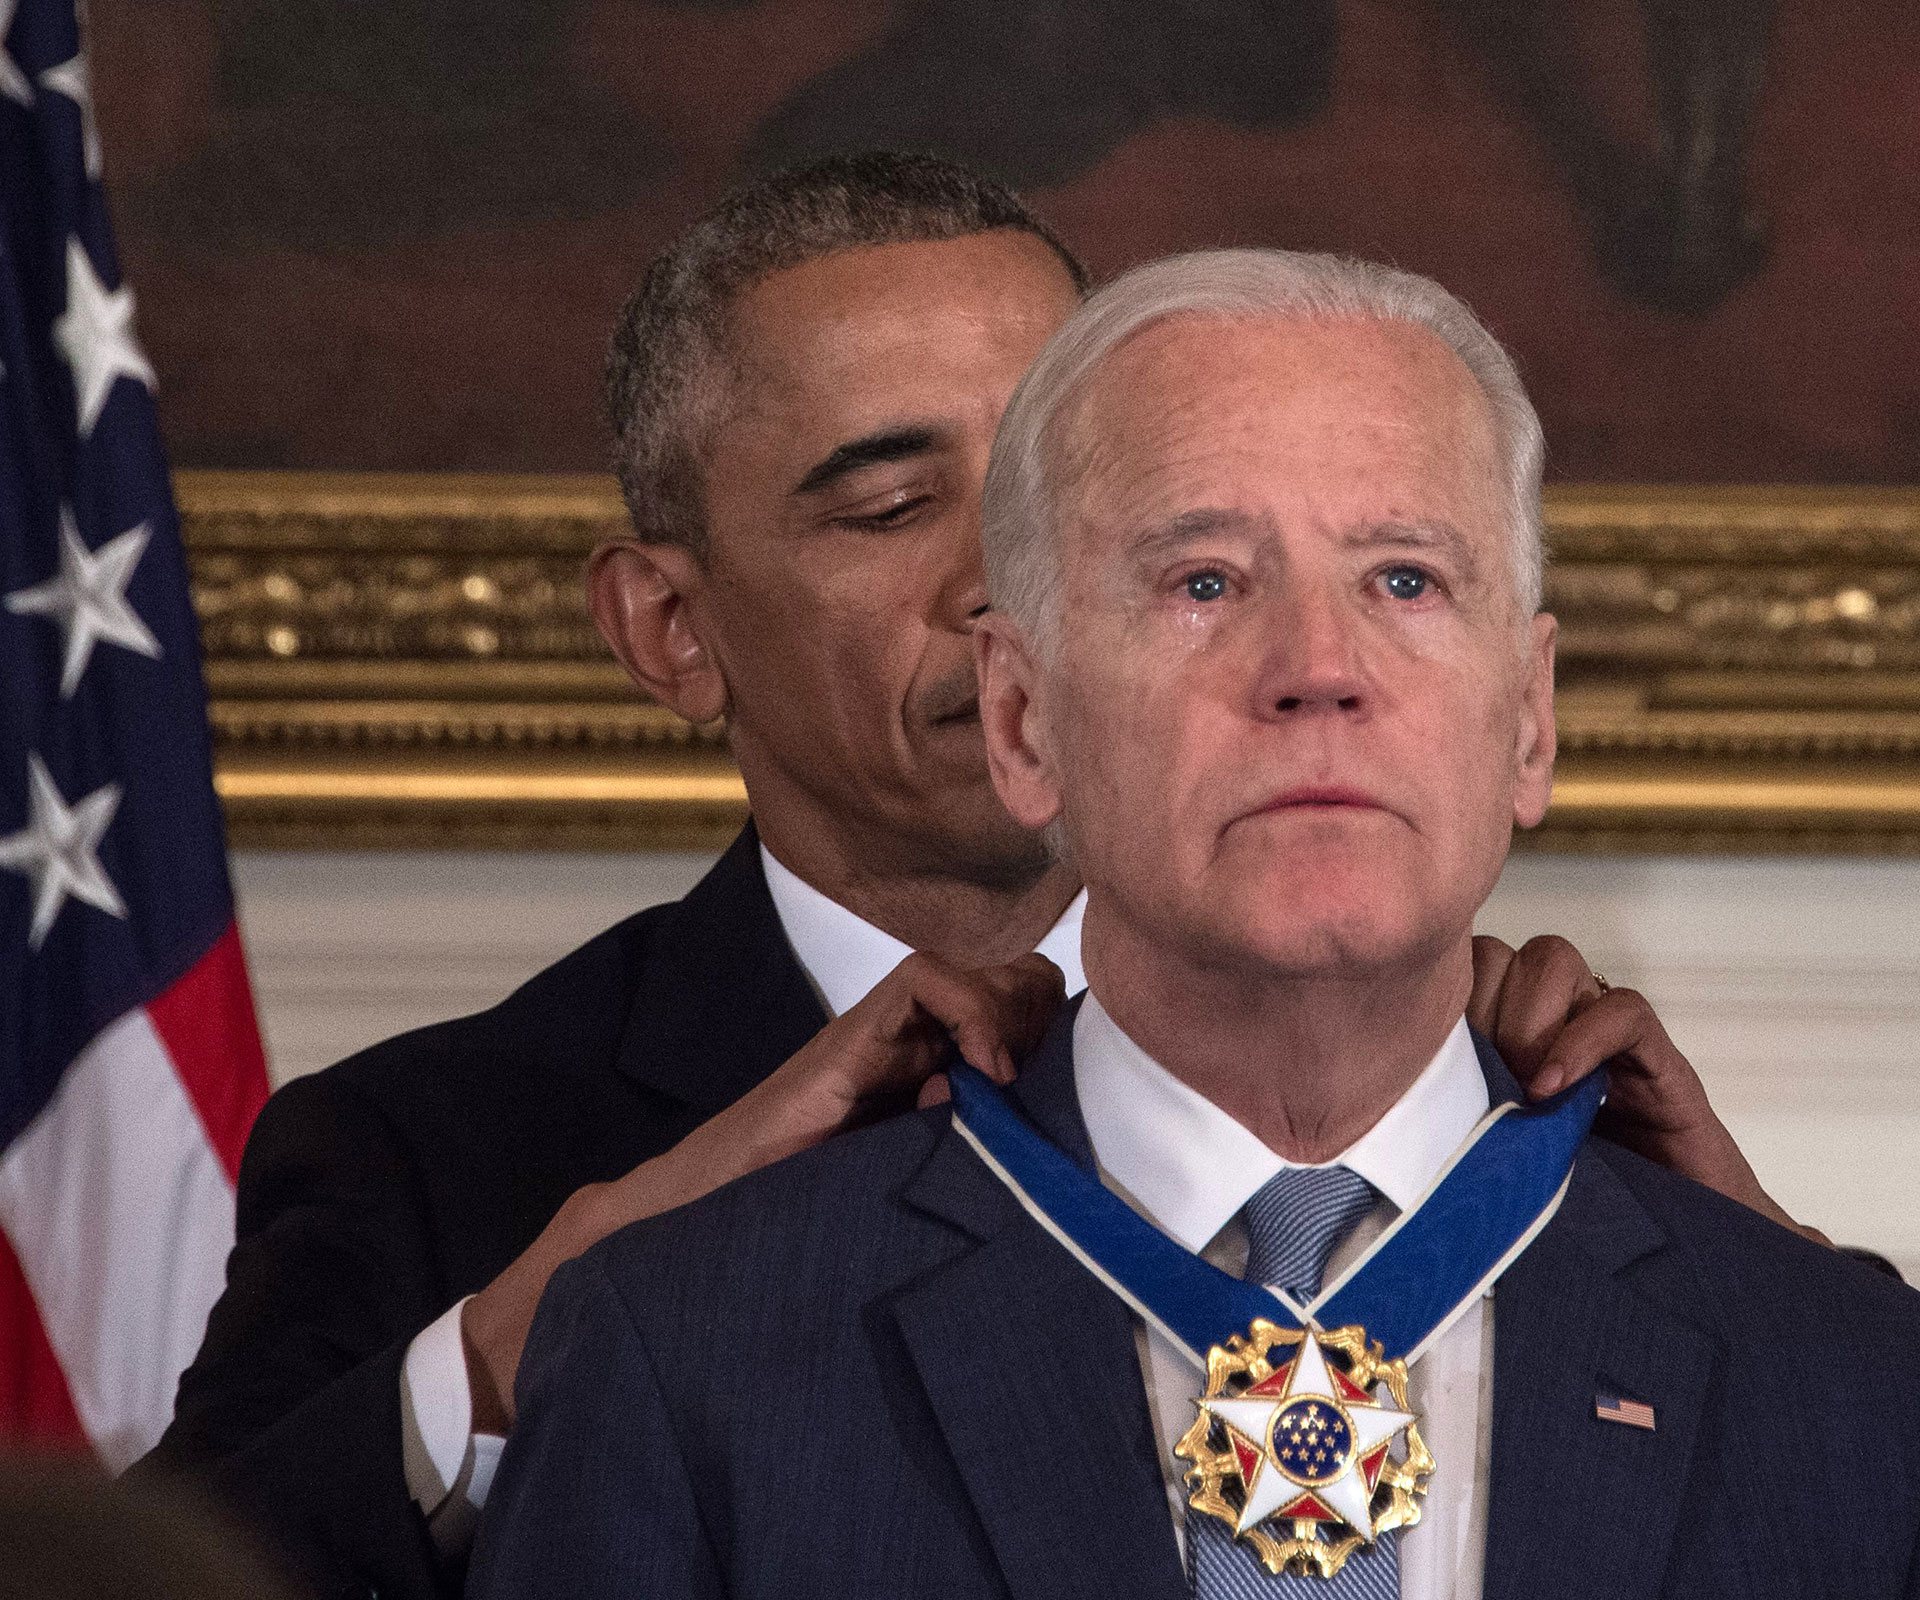 Joe Biden crying as he receives surprise Presidential Medal of Freedom will emotionally break you